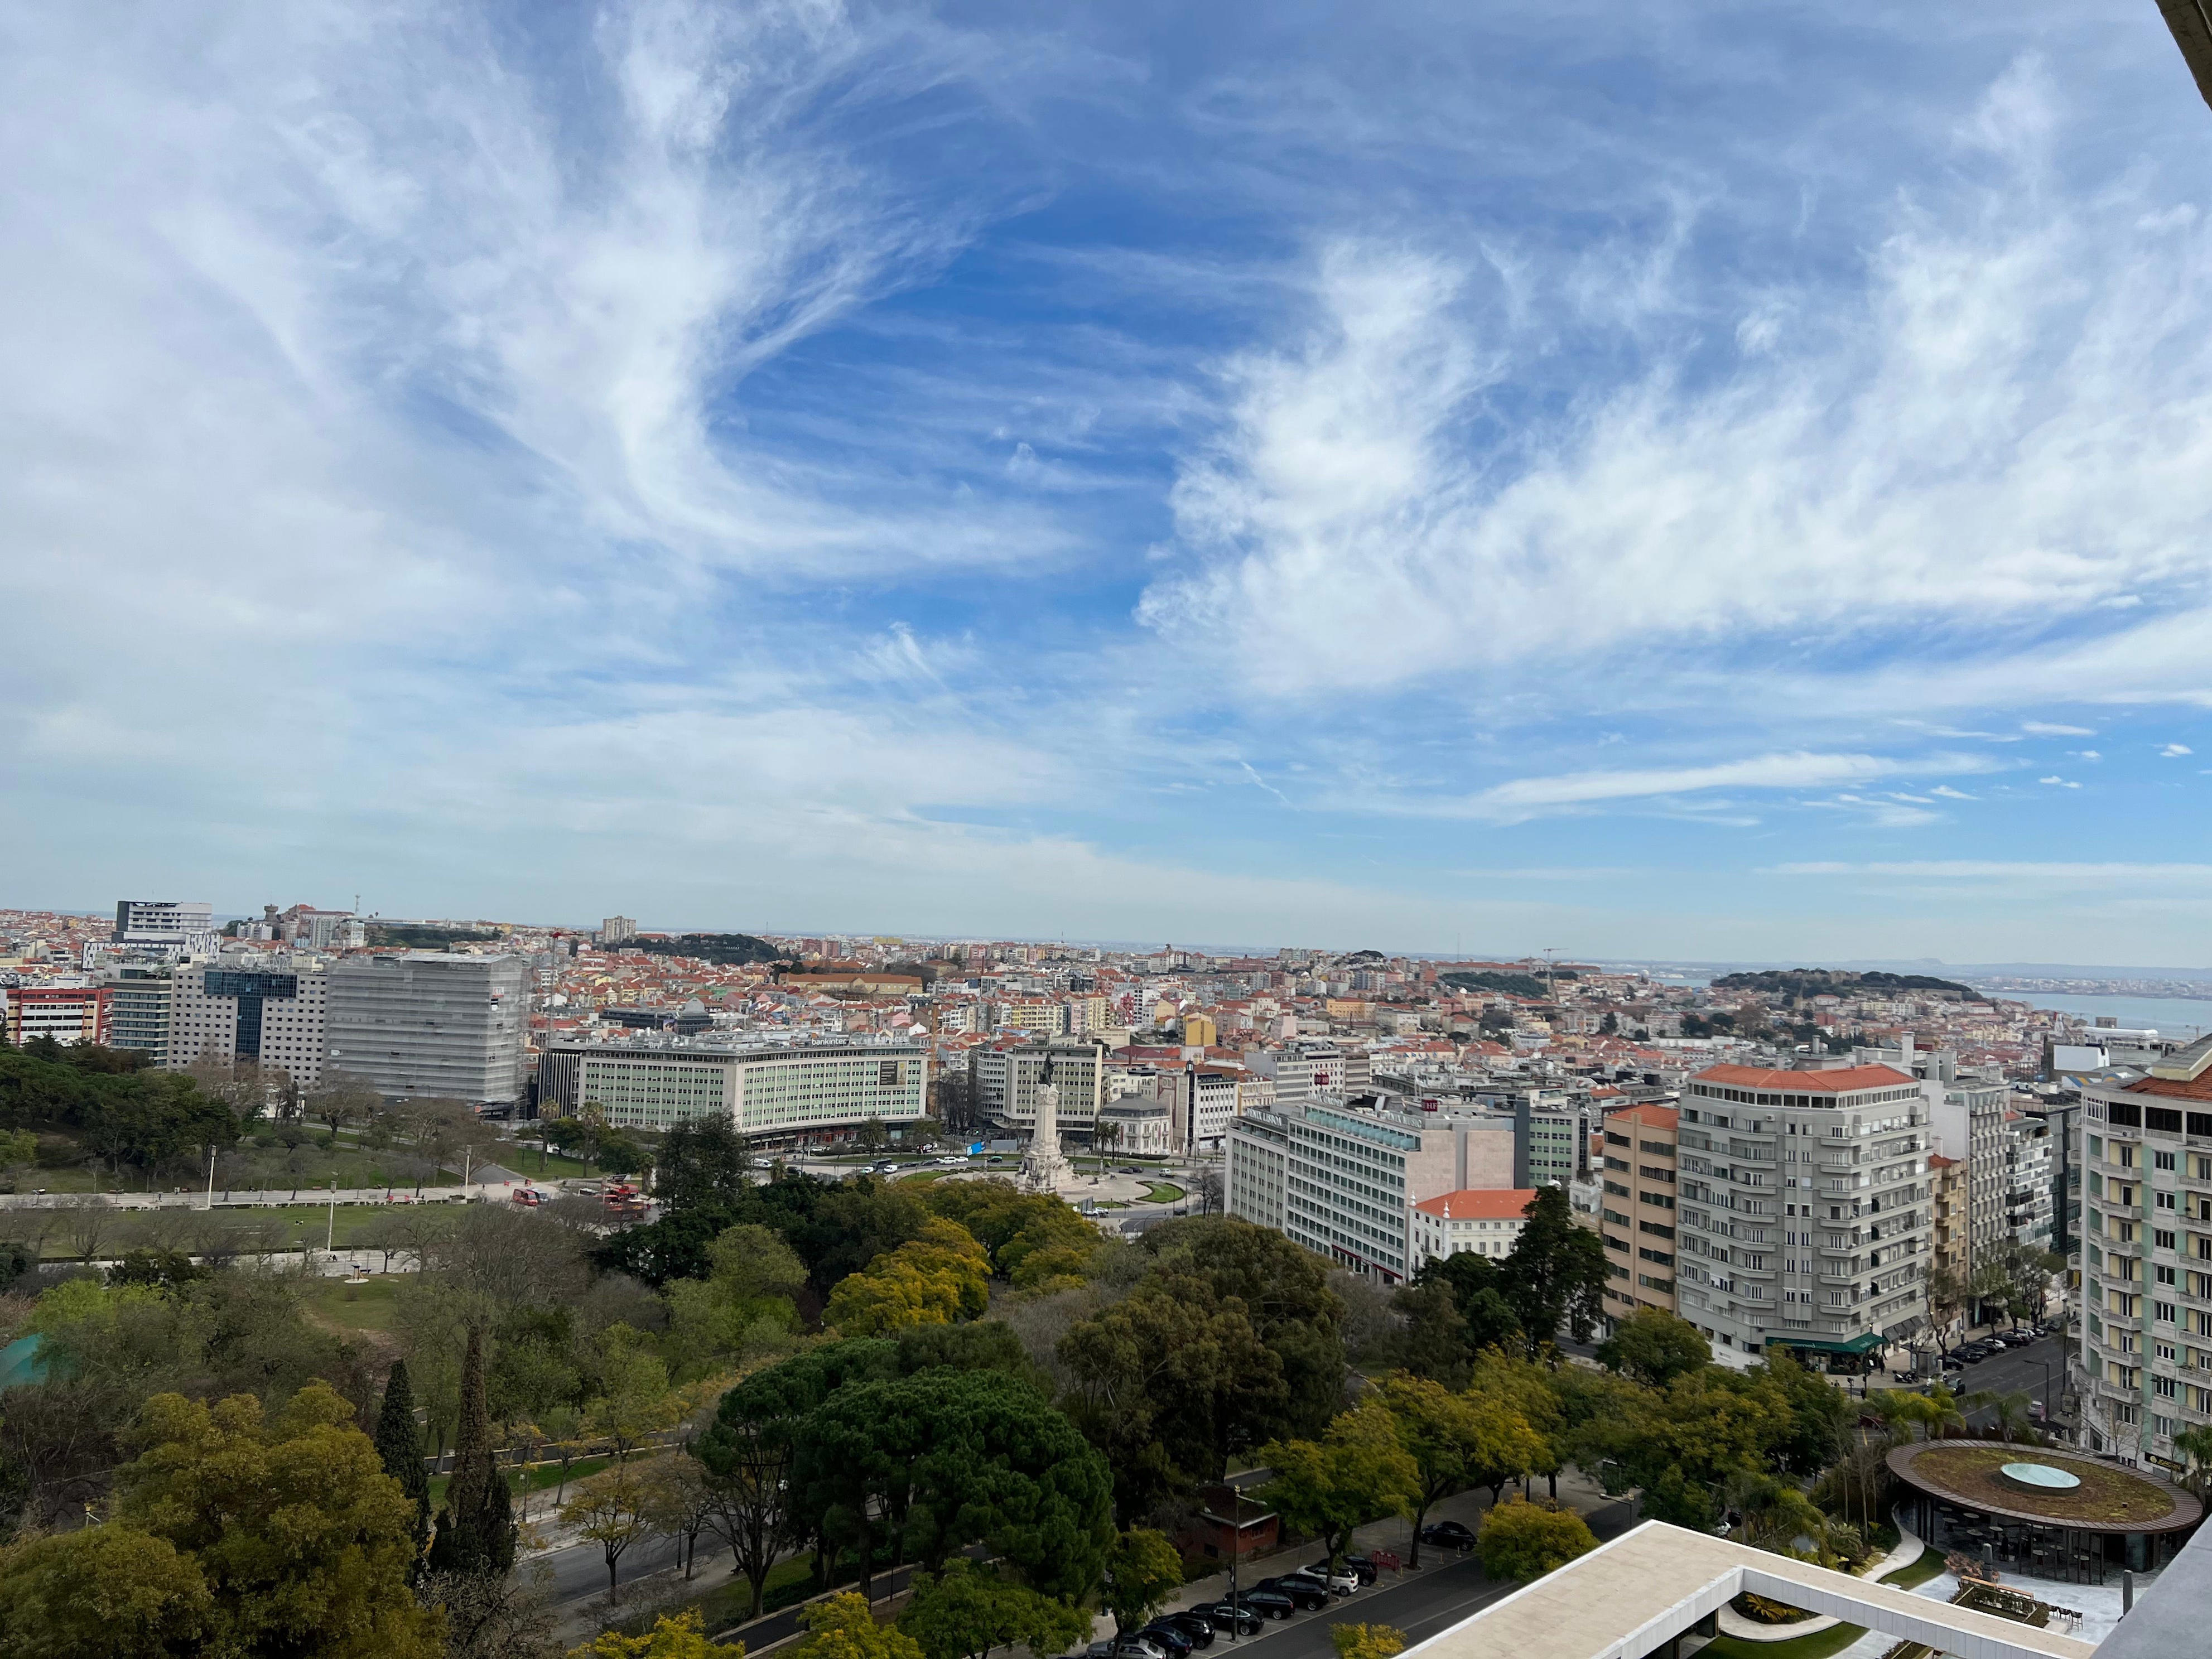 <p>Before you decide <a href="https://www.businessinsider.com/ways-to-stay-safe-at-hotels-according-to-an-employee-2021-10">where to stay in Lisbon</a>, it's important to research the city's different neighborhoods, especially if you plan on walking everywhere. </p><p>I chose the Four Seasons Hotel Ritz in the Marquês de Pombal neighborhood because it was within walking distance of Baixa and Chiado. Plus, my <a href="https://www.businessinsider.com/hotels-with-great-views-2018-8">room had a gorgeous view</a> of the city.</p><p>Places were even closer than they seemed on the map. On our first day in Lisbon, the hotel concierge told us to take a taxi to Chiado and Rossio. However, we decided to walk and ended up arriving in less than 30 minutes. </p><p>As someone who's always on their feet in New York, this journey was a breeze compared to the <a href="https://www.businessinsider.com/walking-dog-things-to-never-do-according-to-veterinarians-2022-3">daily walks I take with my dog</a>. However, the city is hilly, and walking for <em>too long</em> can be brutal. There's no shame in taking a car back. </p><p>Also, Lisbon has a prominent nightlife scene. So if you don't plan on going out or don't want to hear music blasting all night long, you might want to stay in a quieter area.</p>